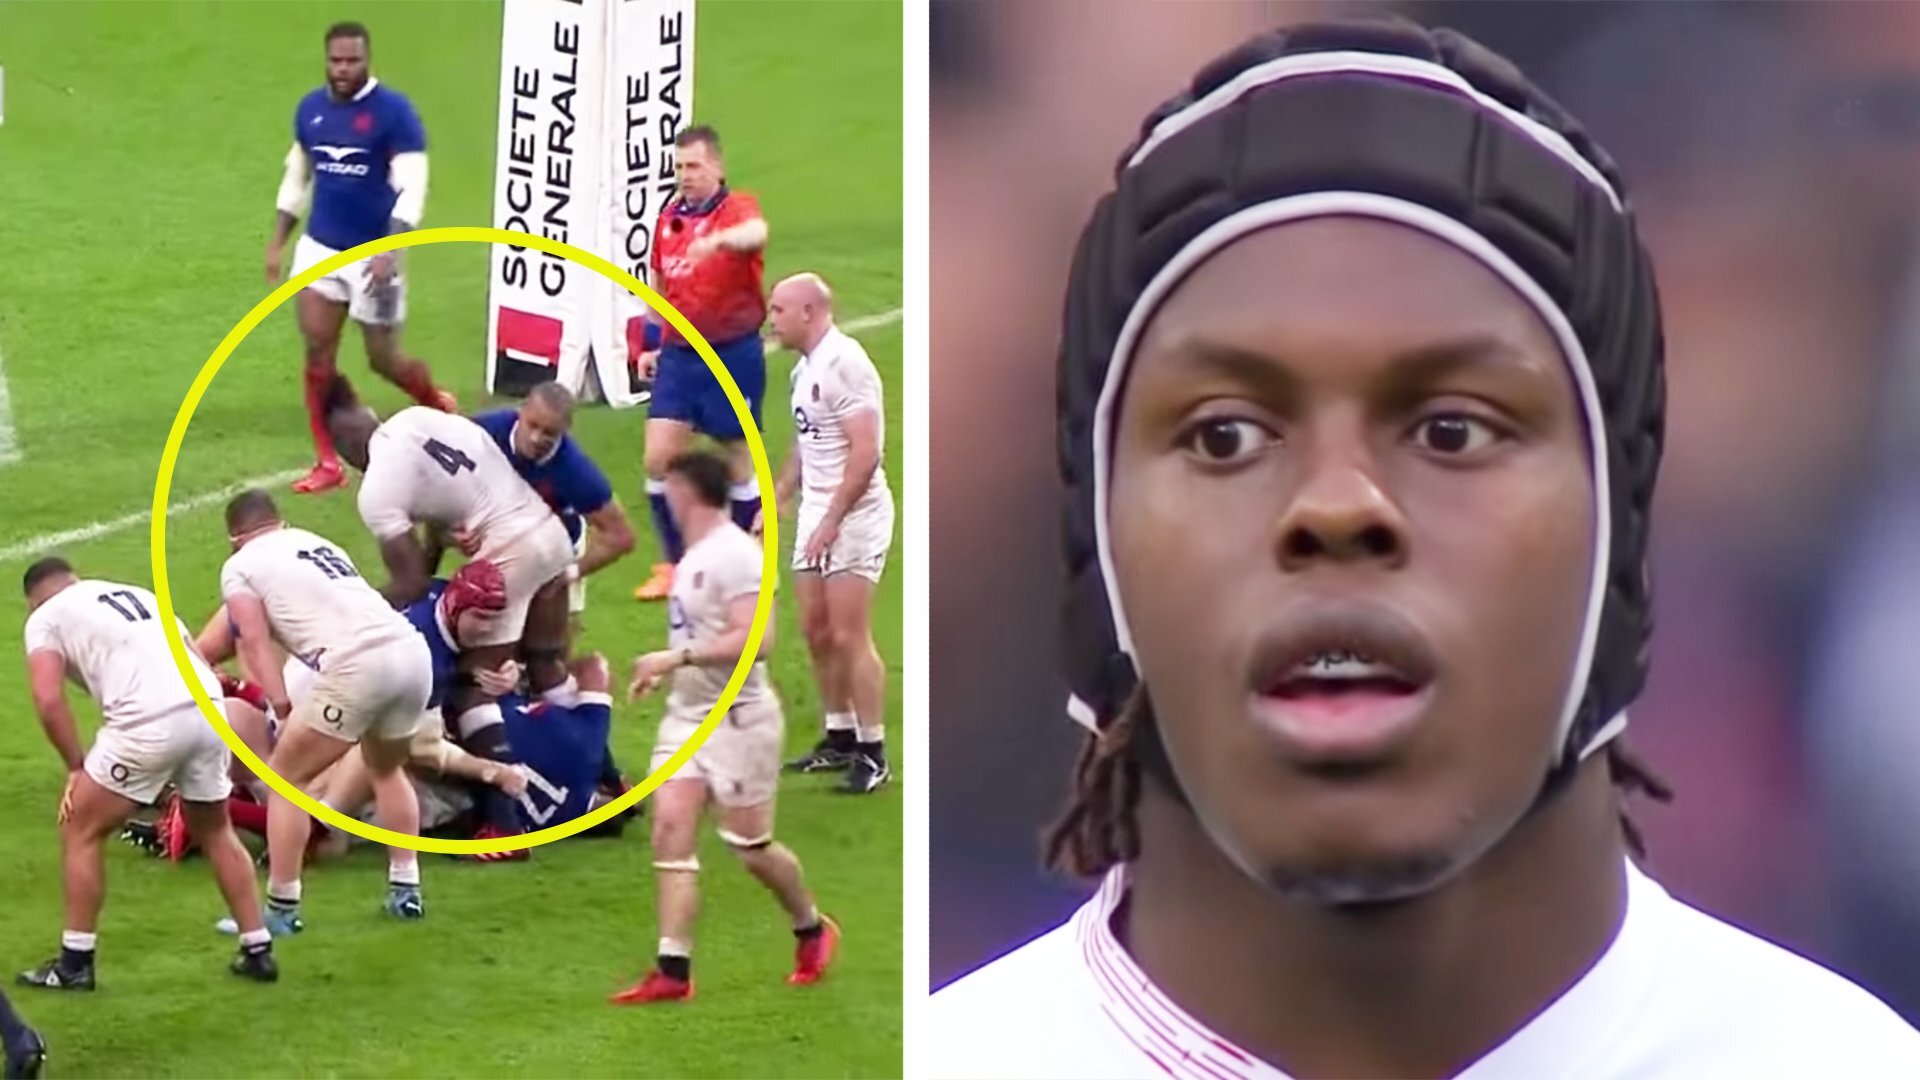 The merciless efforts that Maro Itoje goes to to wind up his opponents laid bare in viral compilation